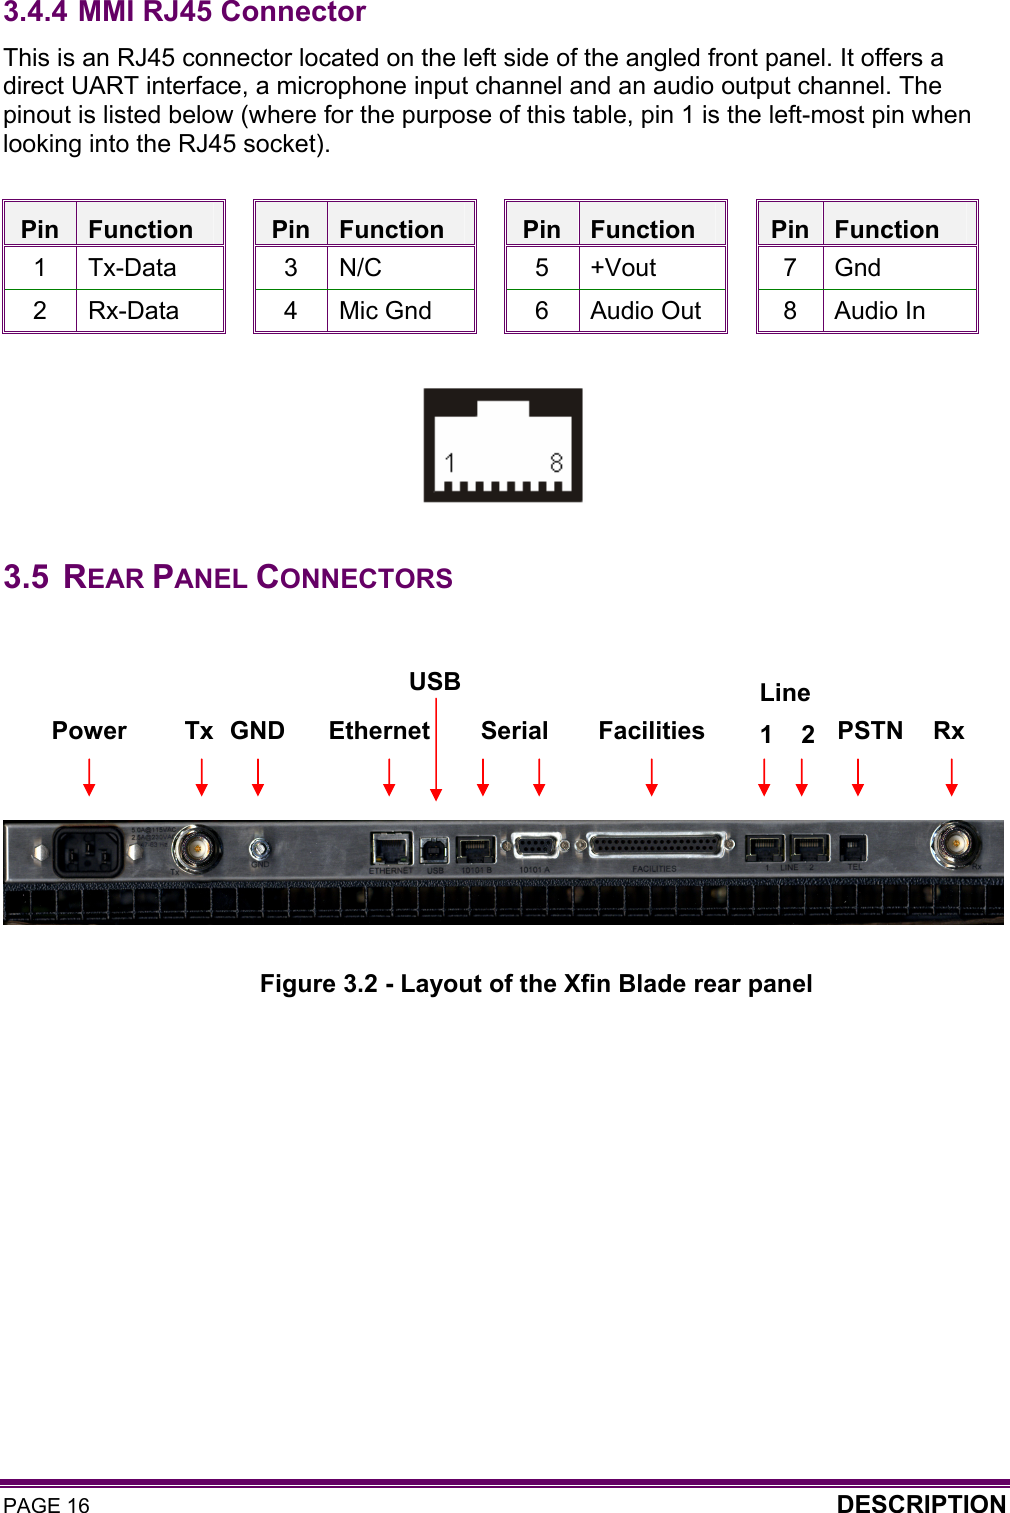 PAGE 16  DESCRIPTION  3.4.4 MMI RJ45 Connector This is an RJ45 connector located on the left side of the angled front panel. It offers a direct UART interface, a microphone input channel and an audio output channel. The pinout is listed below (where for the purpose of this table, pin 1 is the left-most pin when looking into the RJ45 socket).  Pin  Function  Pin  Function  Pin  Function  Pin  Function 1 Tx-Data  3 N/C  5 +Vout  7 Gnd 2 Rx-Data  4 Mic Gnd  6 Audio Out  8 Audio In    3.5 REAR PANEL CONNECTORS            Figure 3.2 - Layout of the Xfin Blade rear panel Tx Power      GND  Ethernet  Serial  Facilities   Line   1    2  PSTN Rx USB